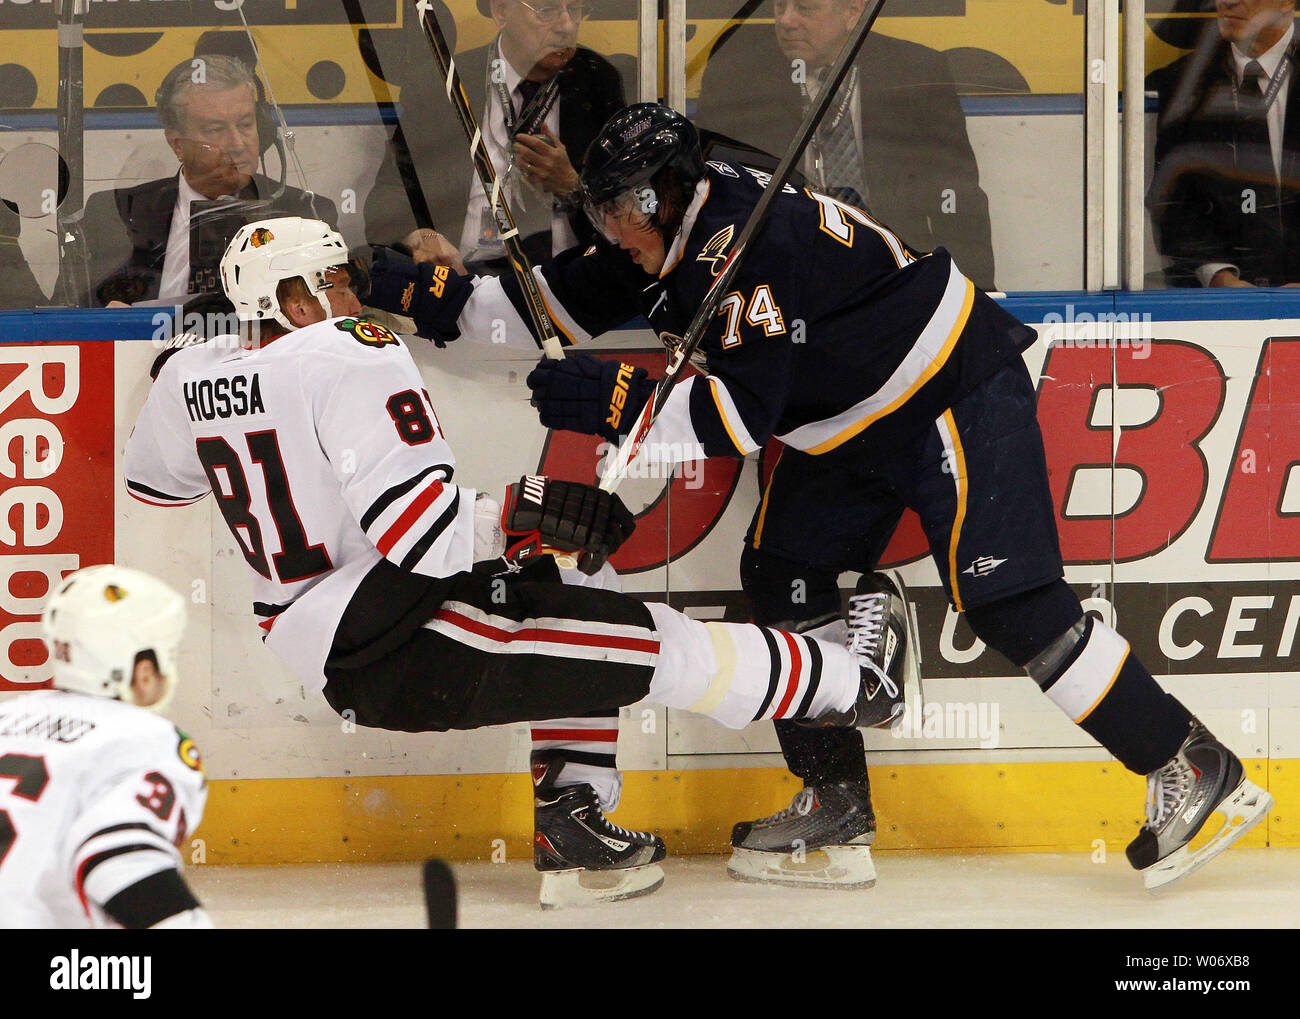 St. Louis Blues TJ Oshie (R) levels Chicago Blackhawks Marian Hossa of the Slovak Republic in the first period at the Scottrade Center in St. Louis on February 21, 2011.  UPI/Bill Greenblatt Stock Photo